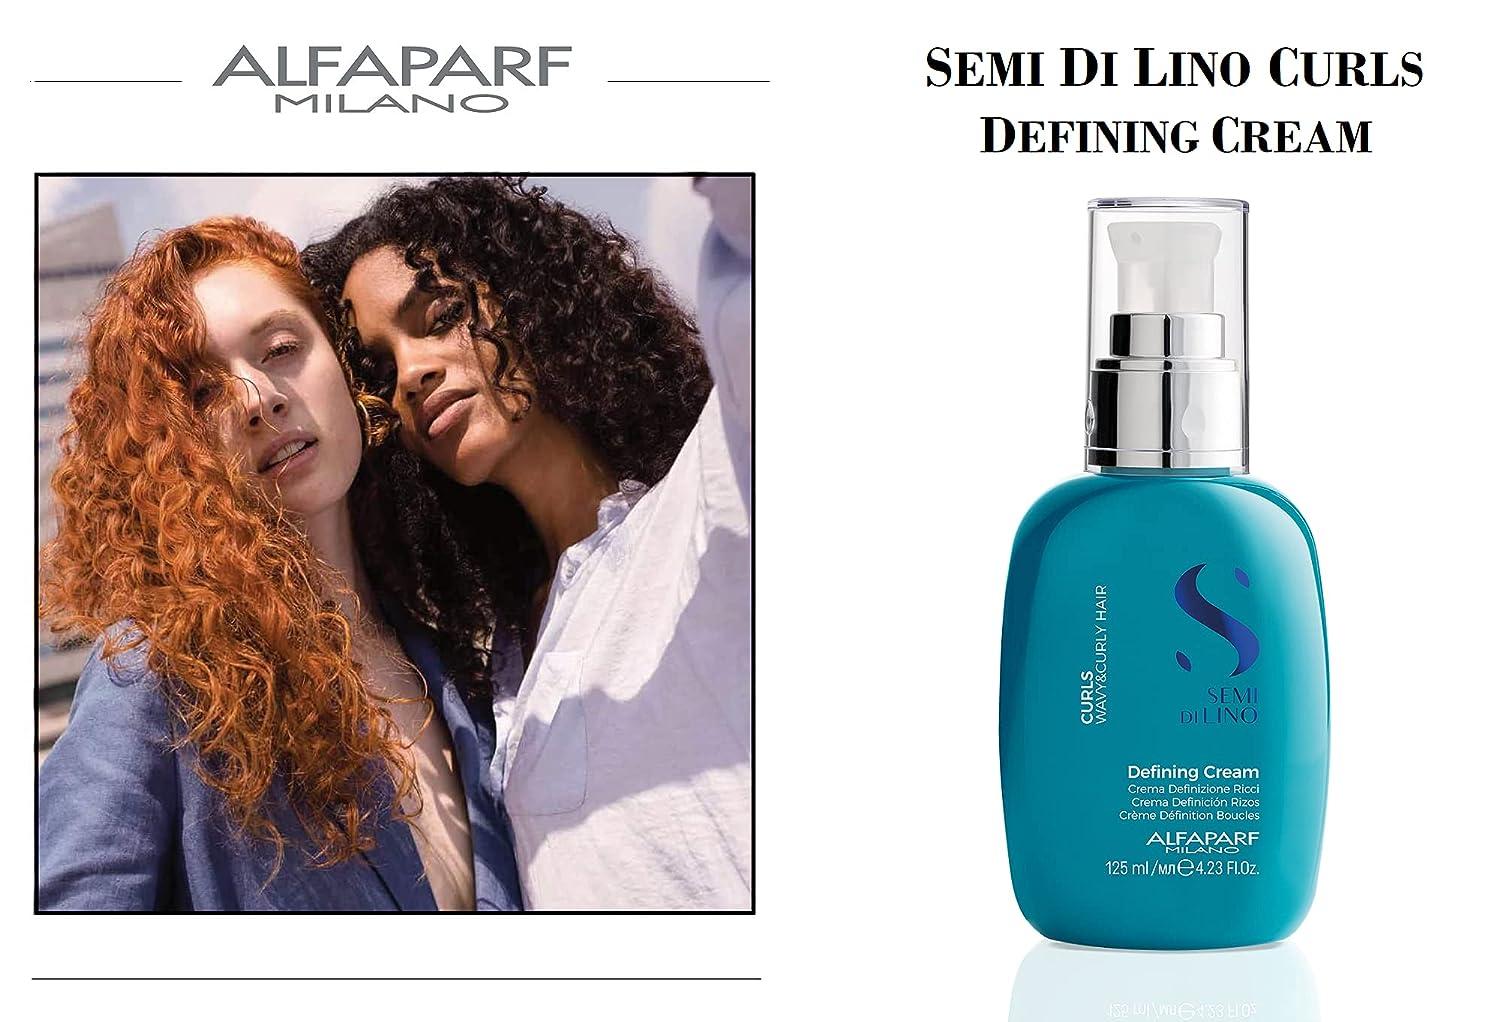 Alfaparf Milano Semi Di Lino Curls Defining Cream for Wavy and Curly Hair -  Hydrates and Nourishes - Reduces Frizz - Humidity and Thermal Protection -  Vegan-Friendly Formula - 4.23 fl. oz.